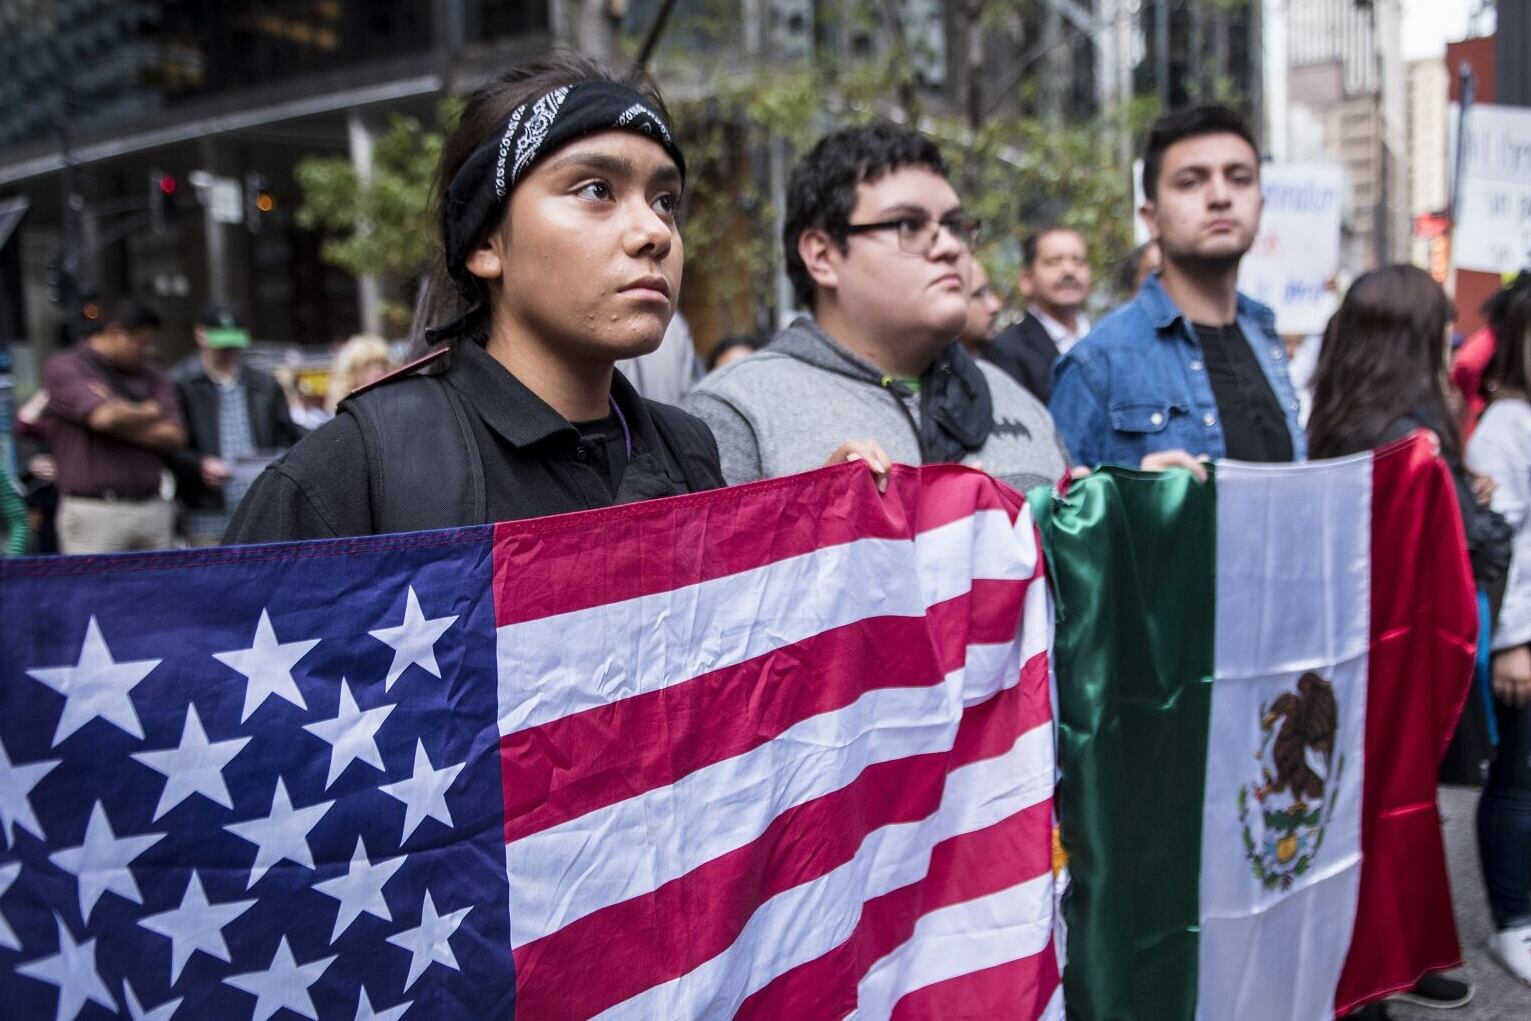 Dreamers carry the U.S. and Mexican flag during a protest in Chicago in 2017.